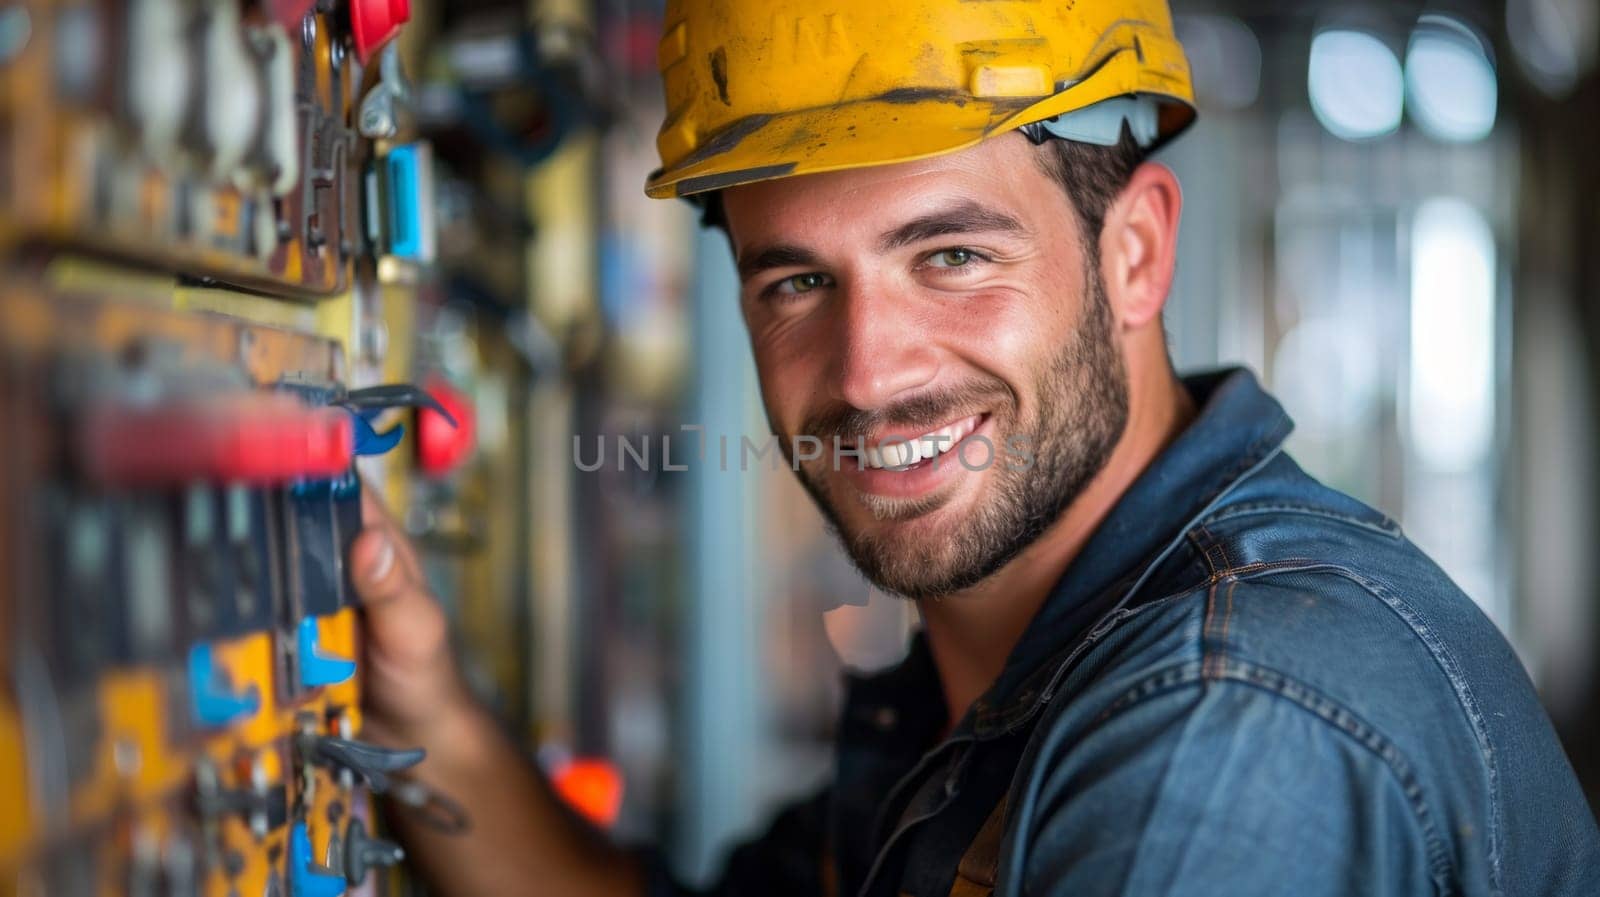 A man in a yellow hard hat smiling while working on an electrical panel